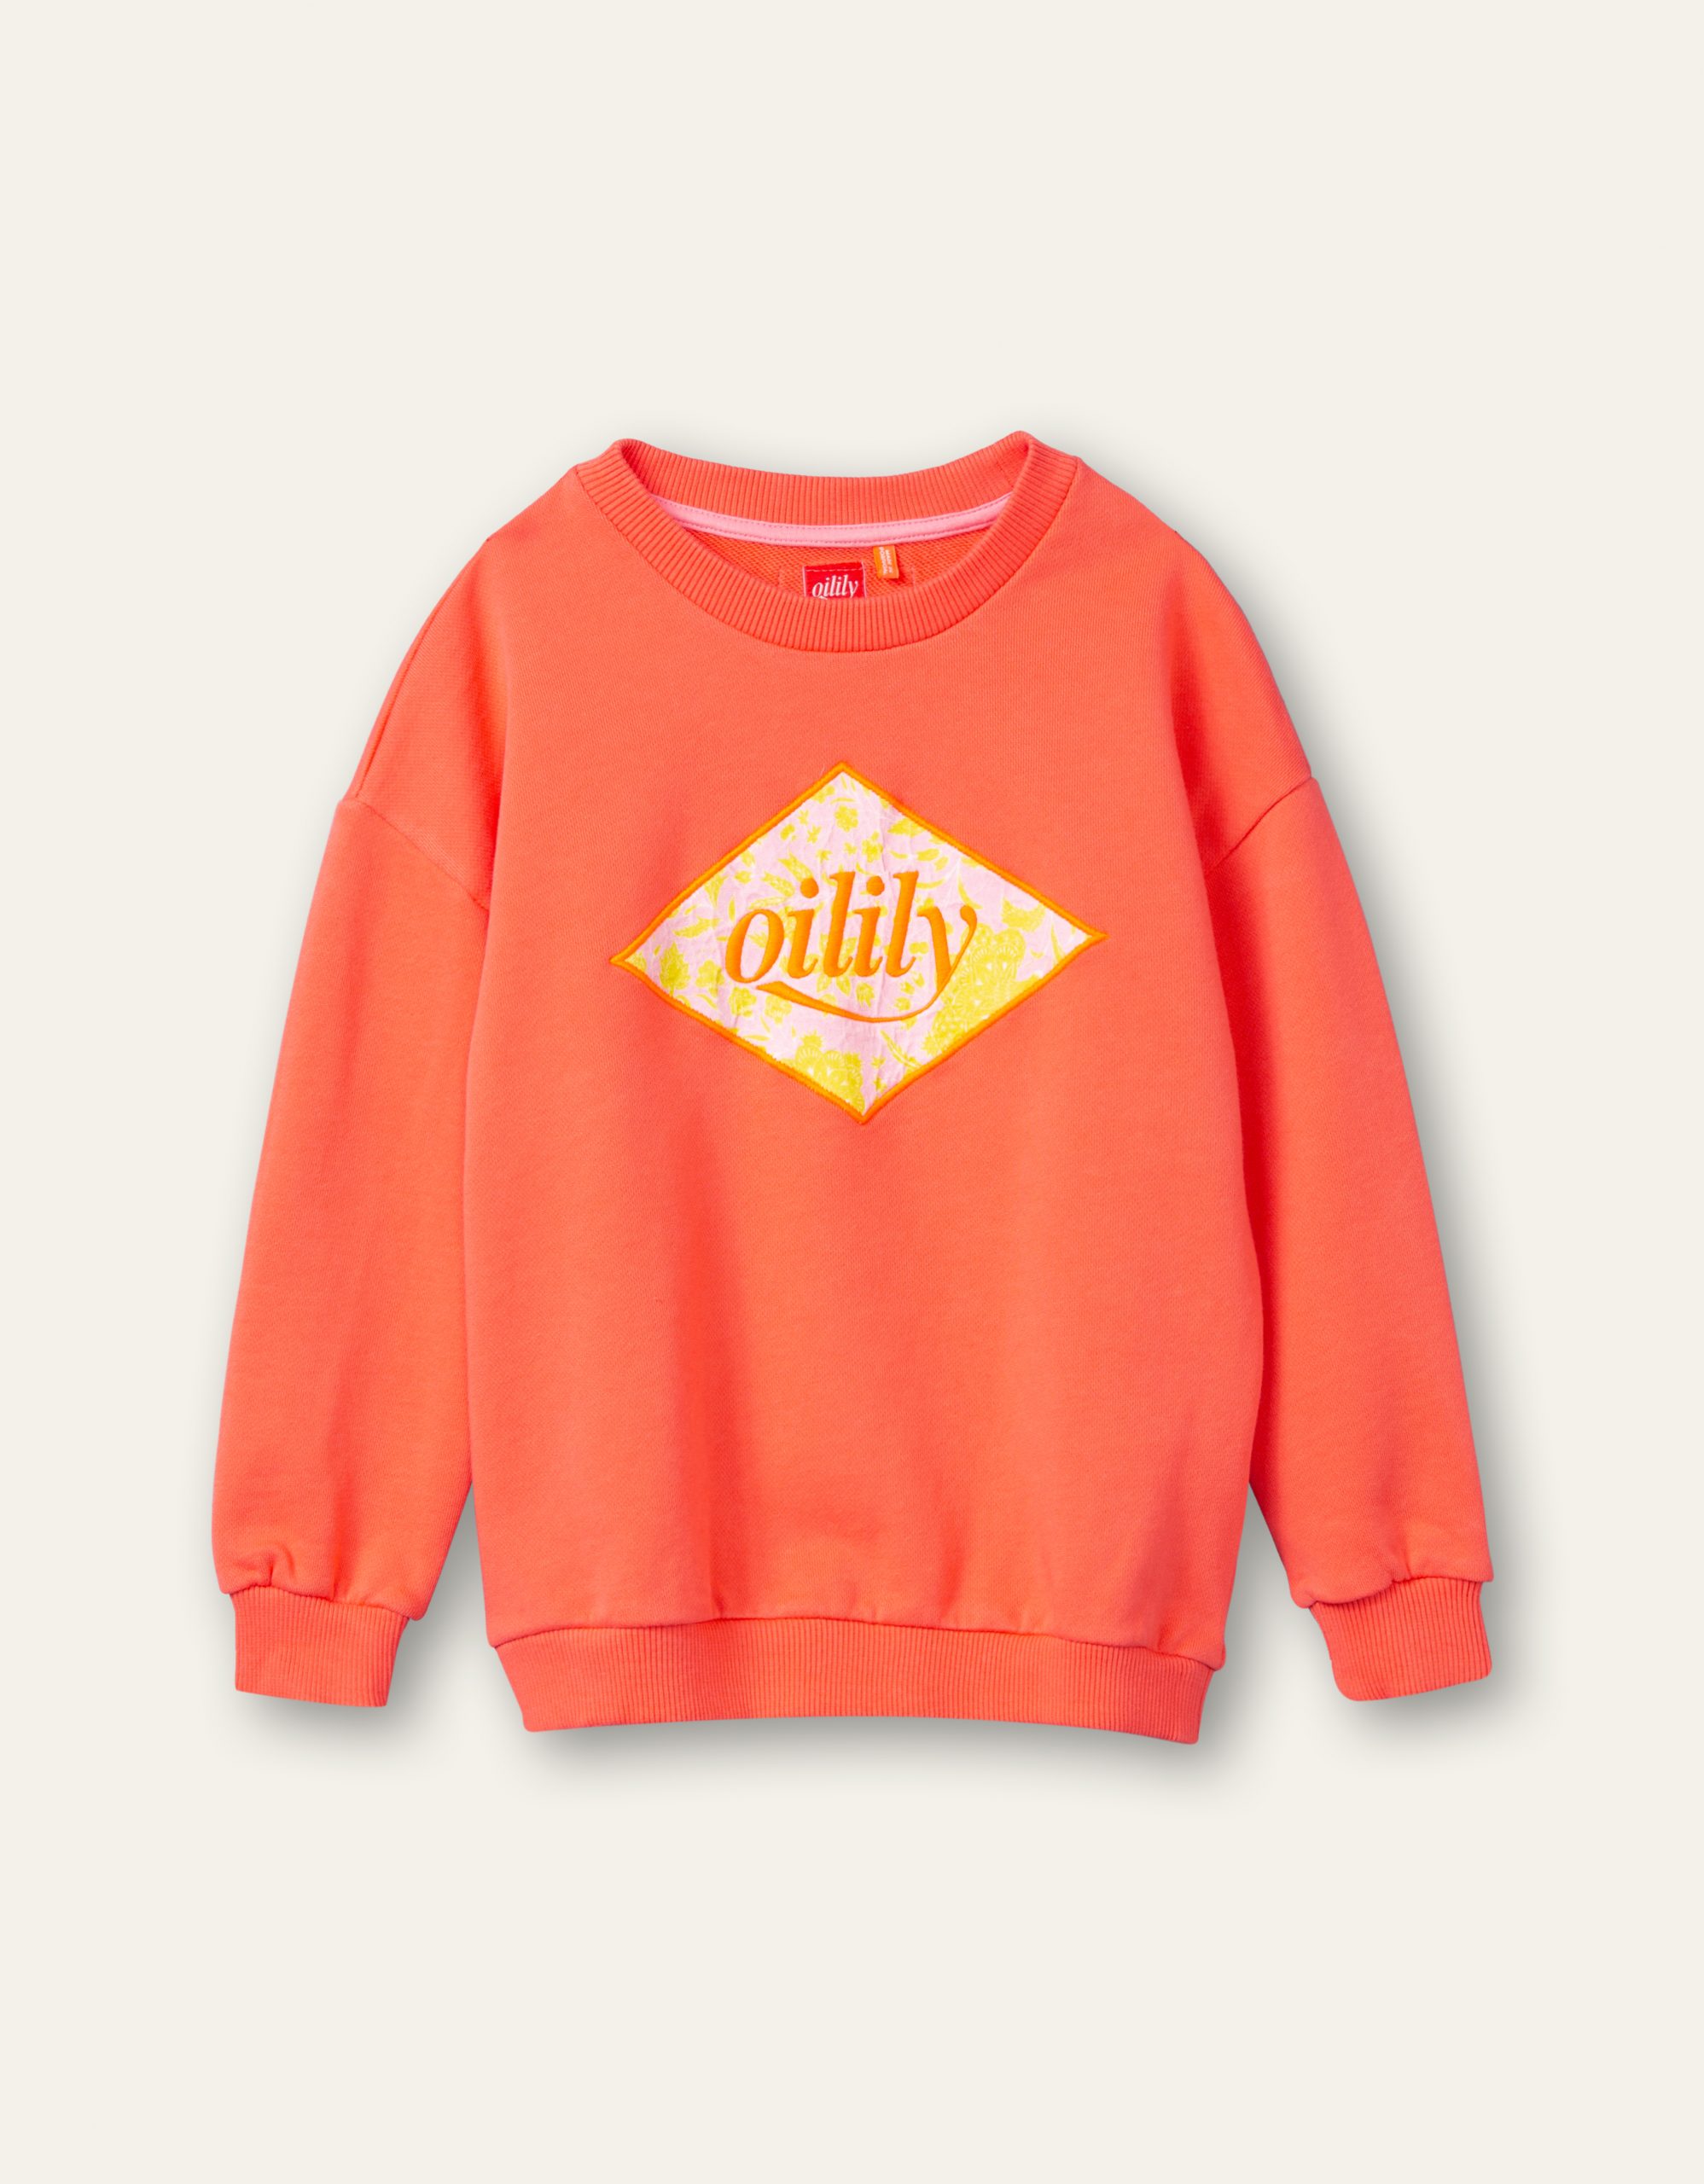 Oilily SS21 Heritage Sweater Hot Coral/Orange Paisley Logo